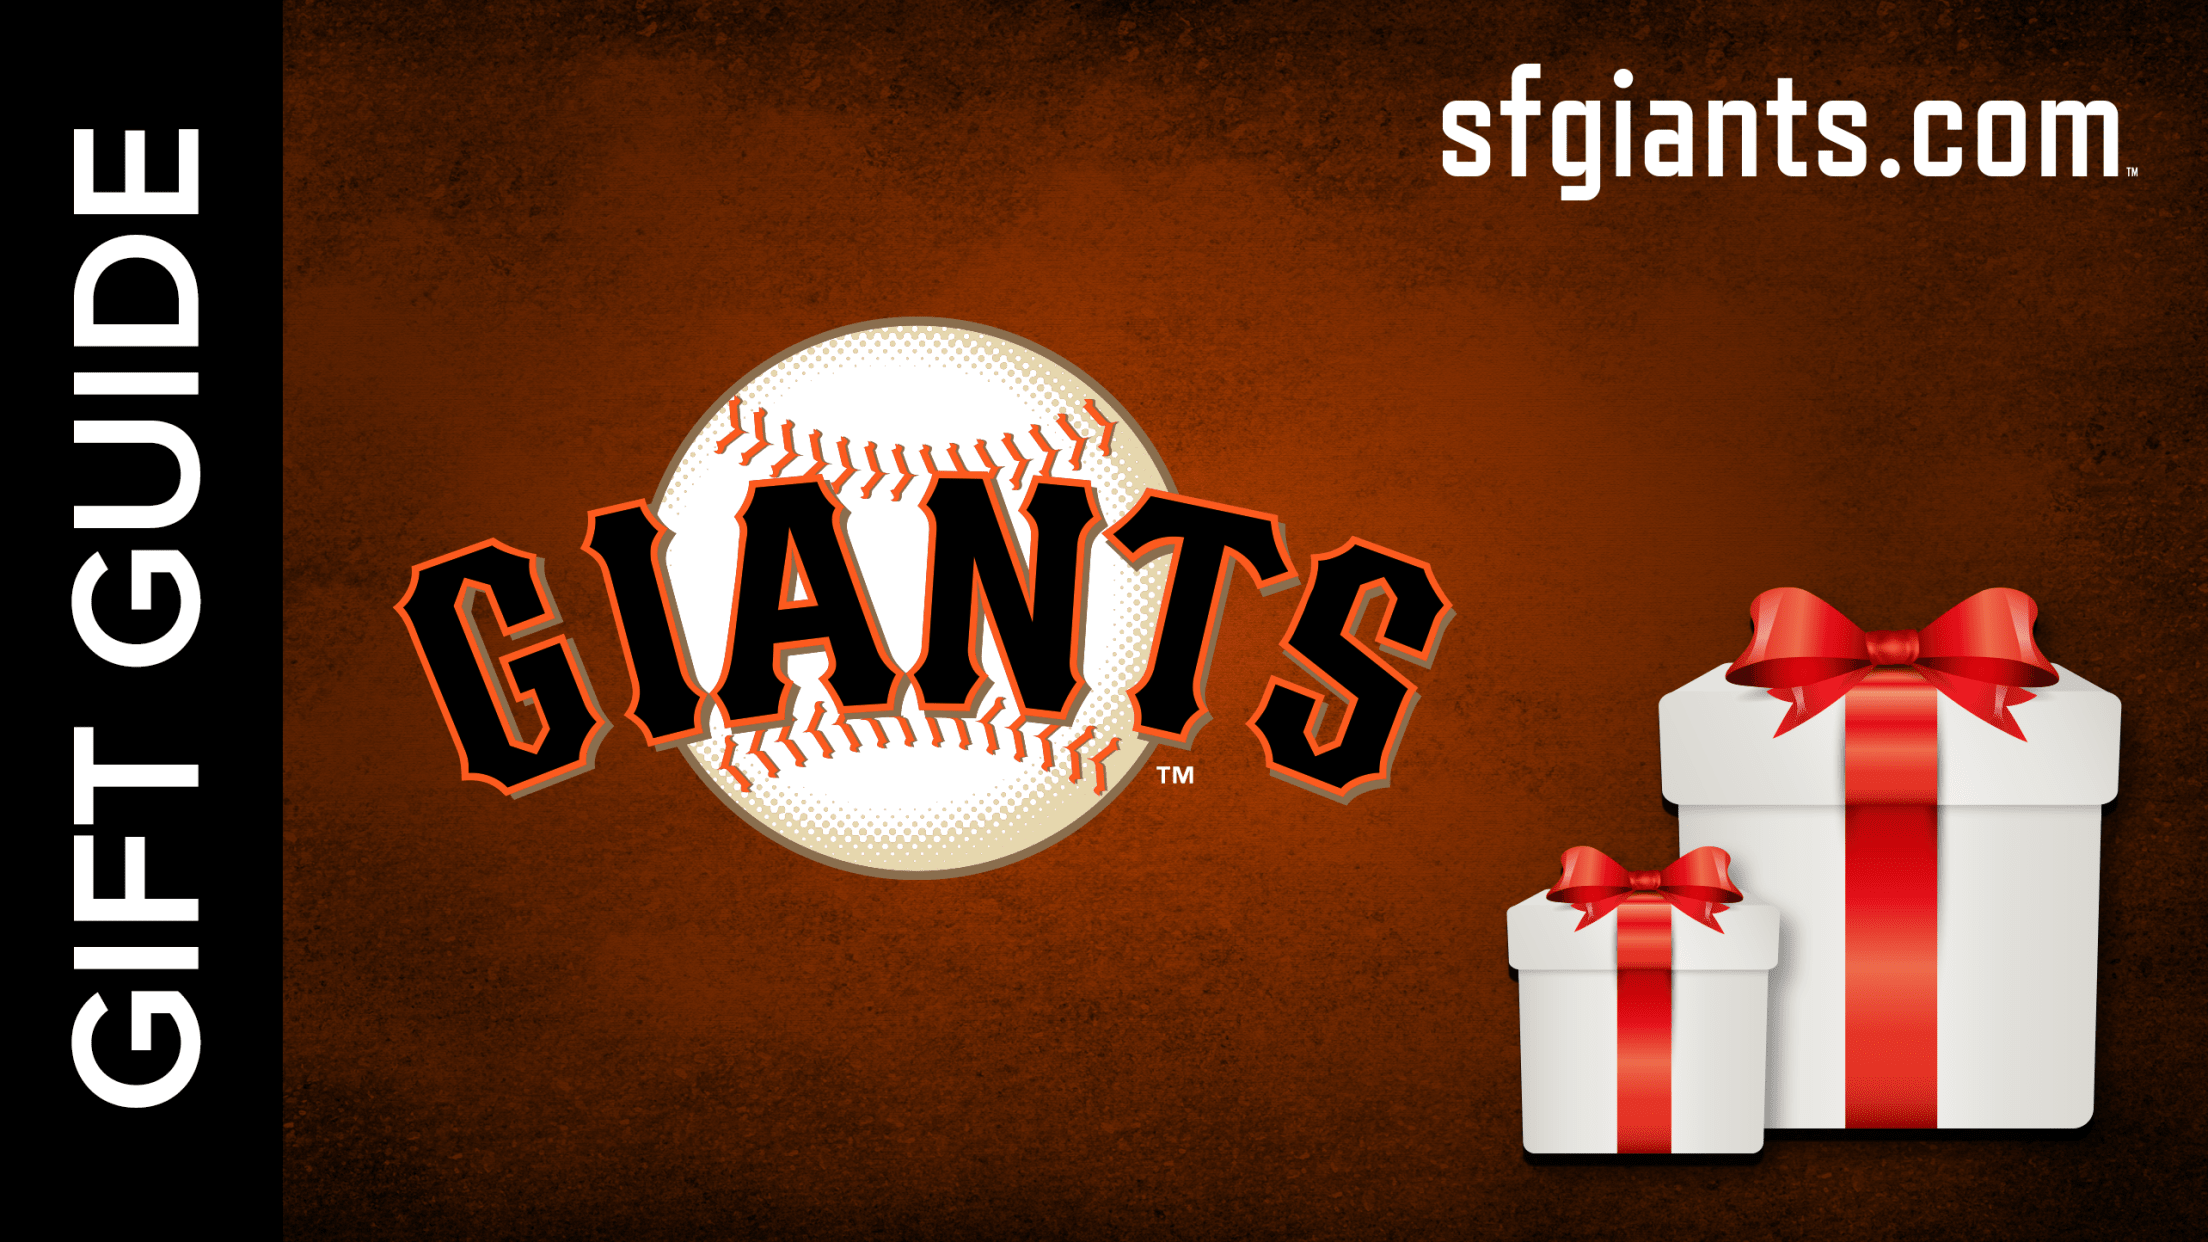 Last Minute Holiday Gifts for Every #SFGiants Fan, by San Francisco Giants